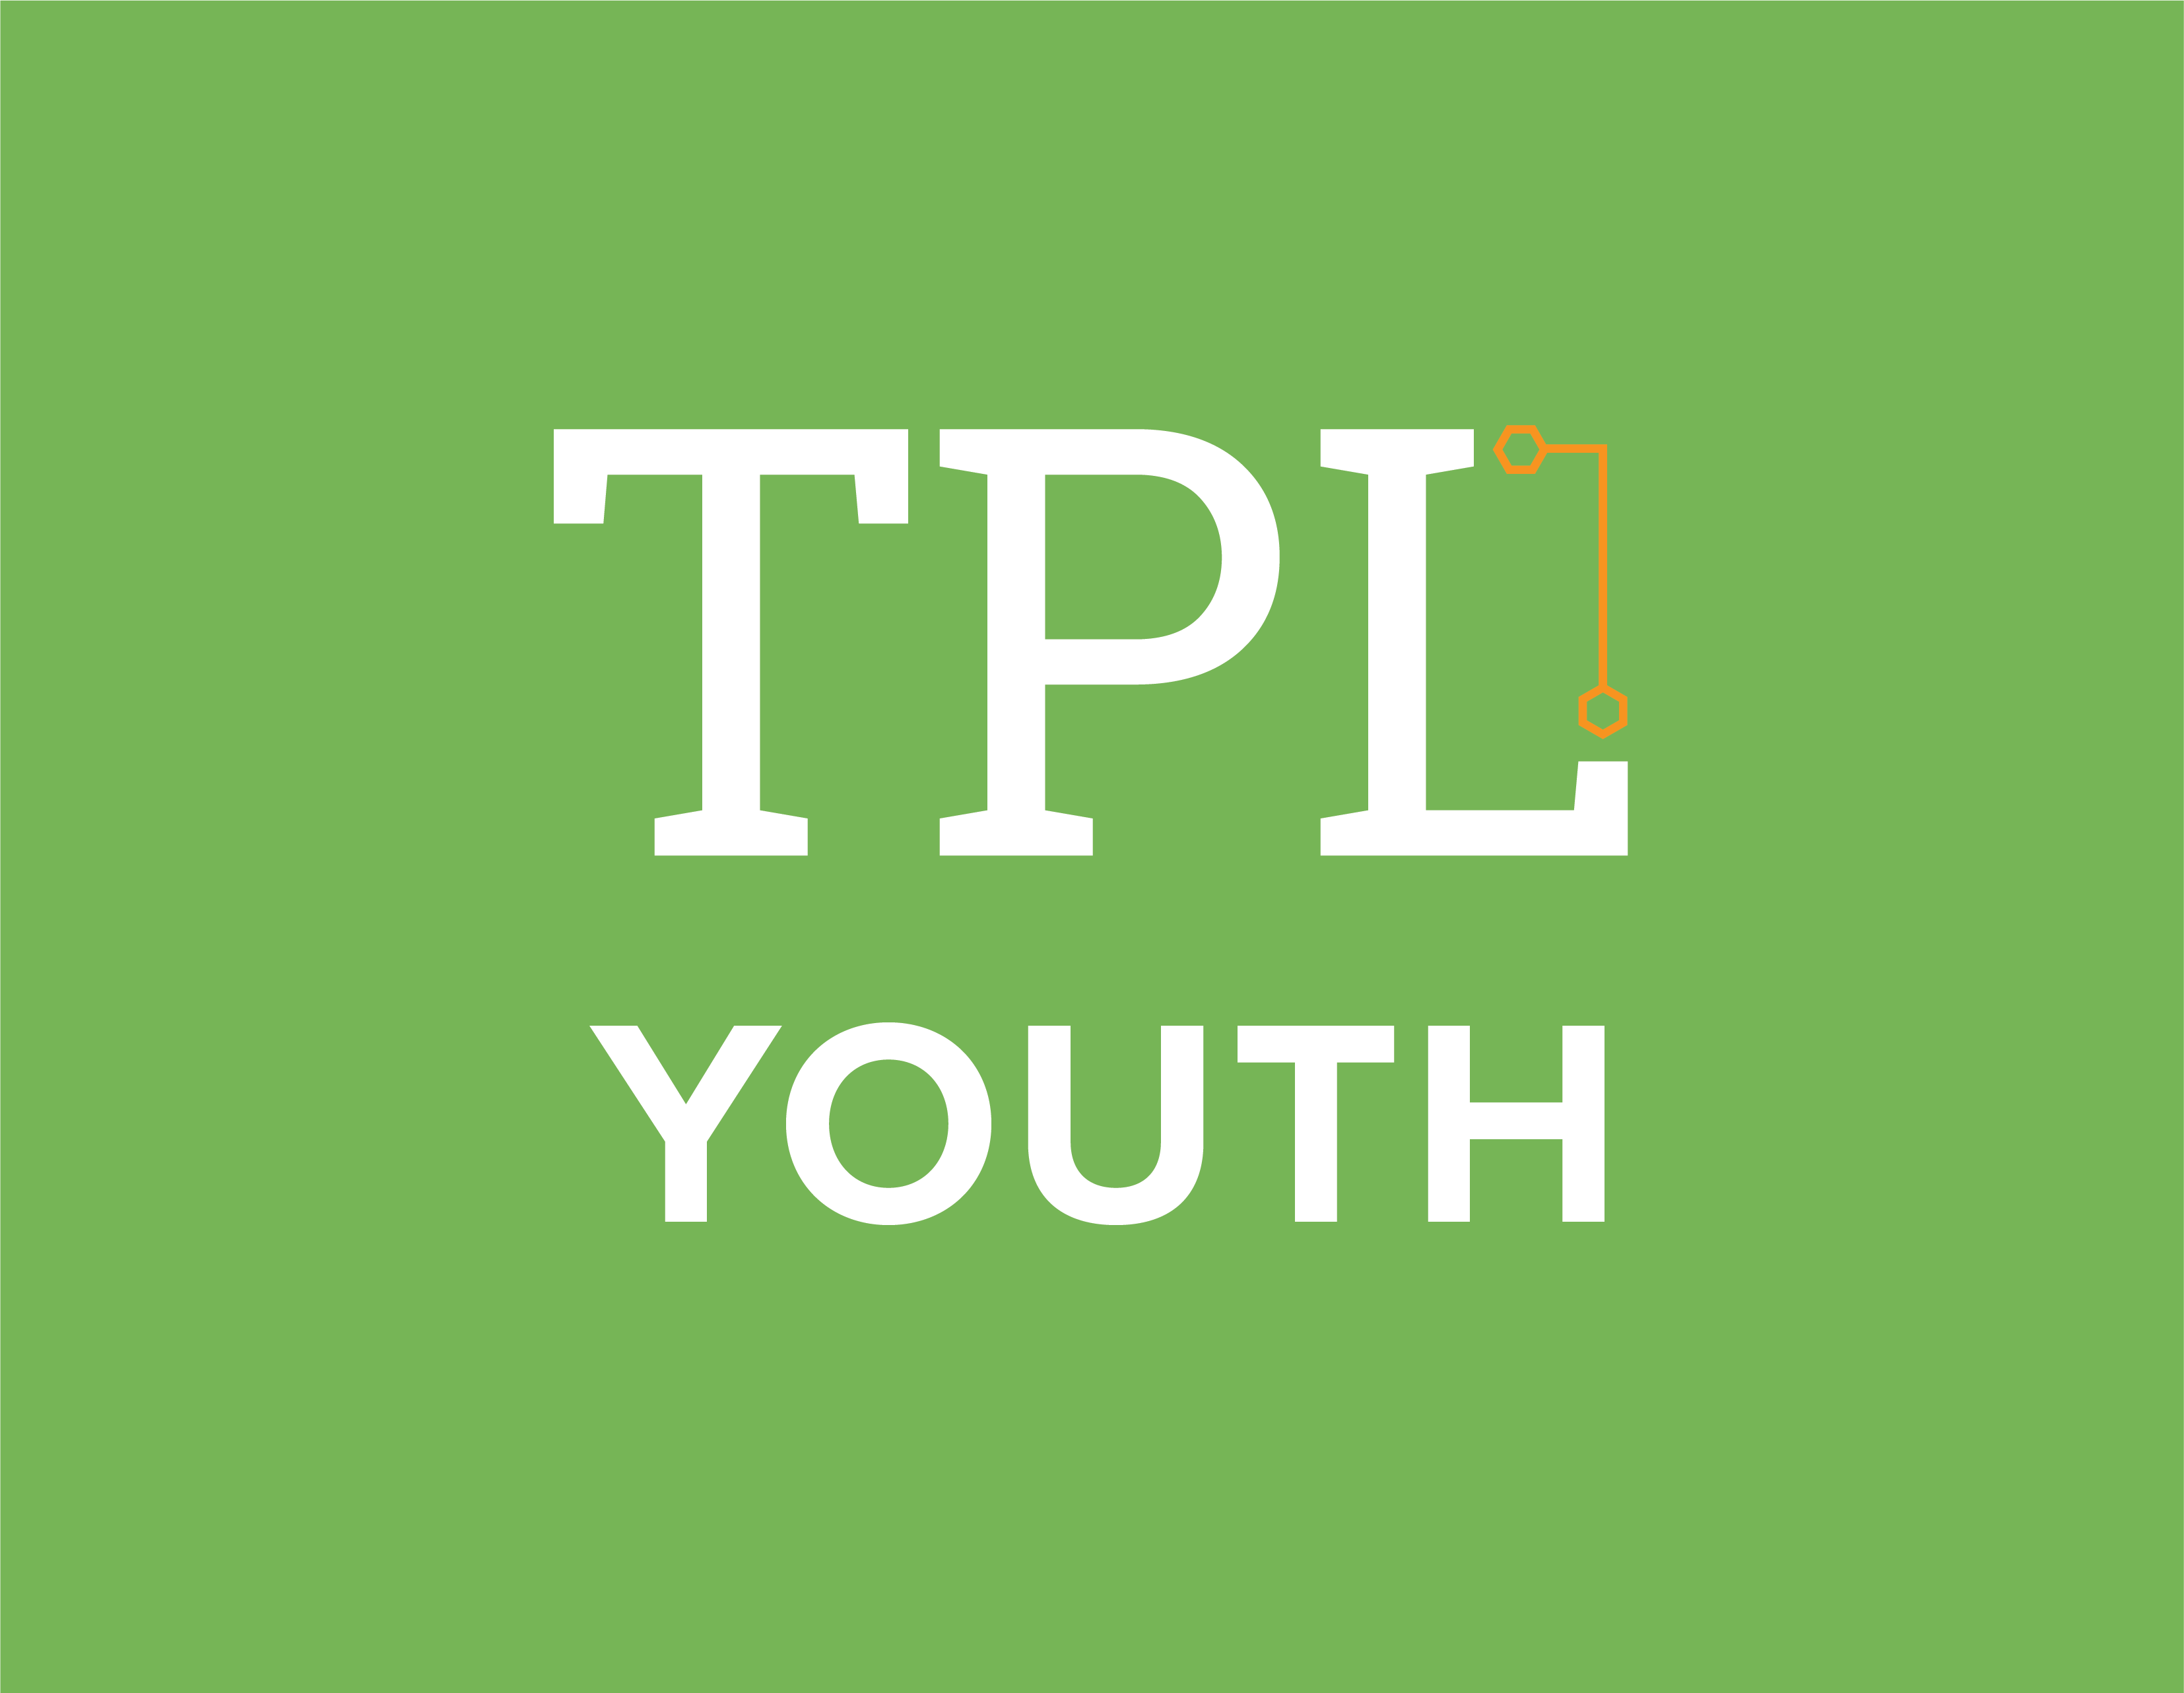 TPL Youth in green square